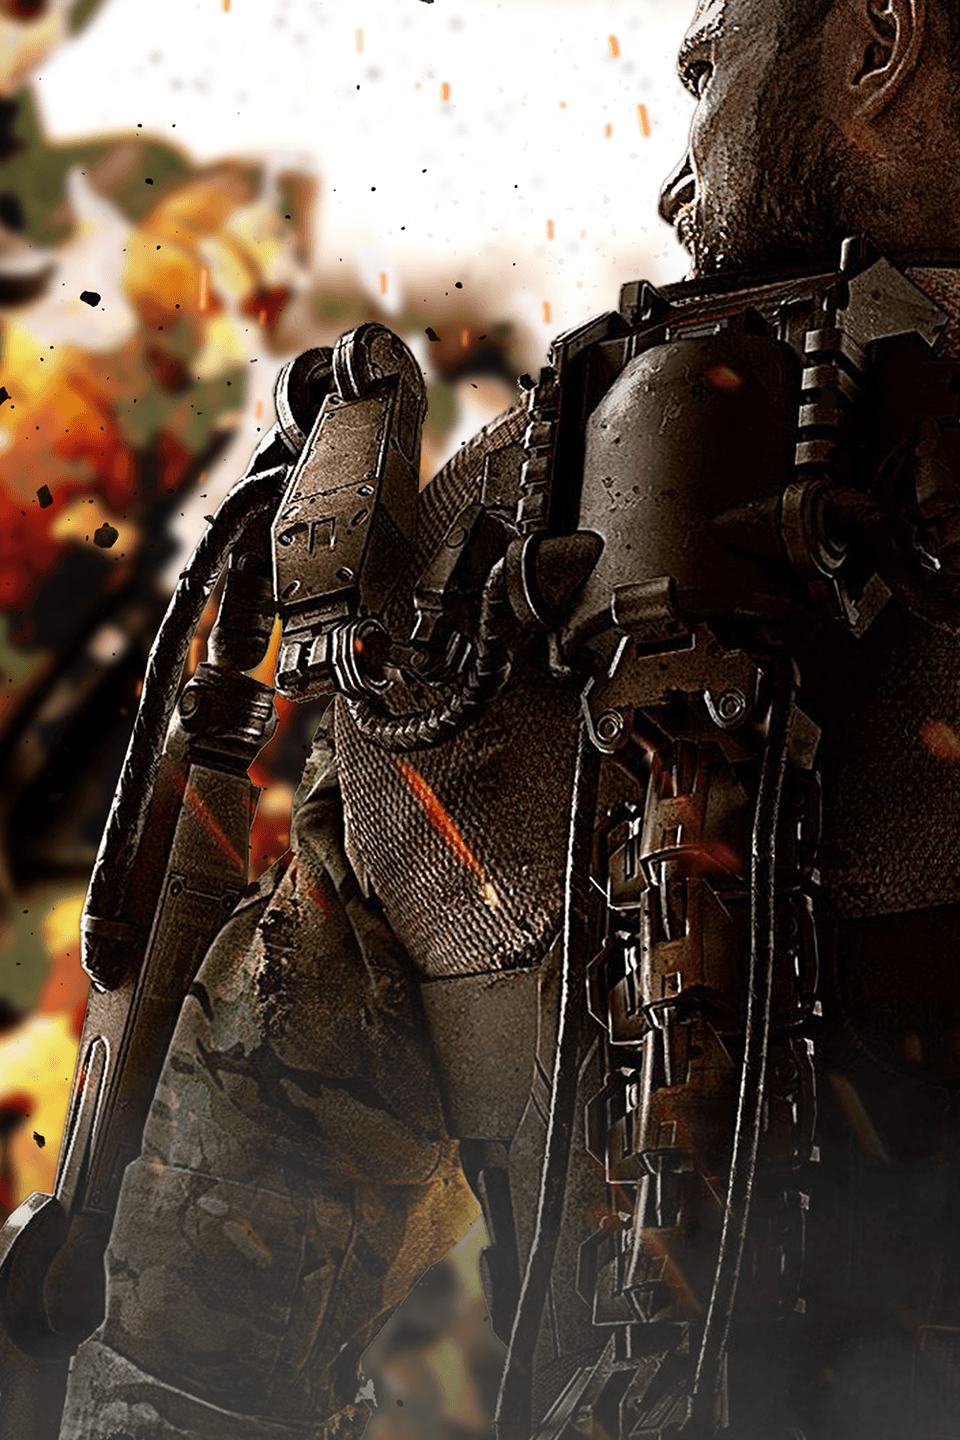 Cod Aw Wallpaper Aw Wallpaper iPhone